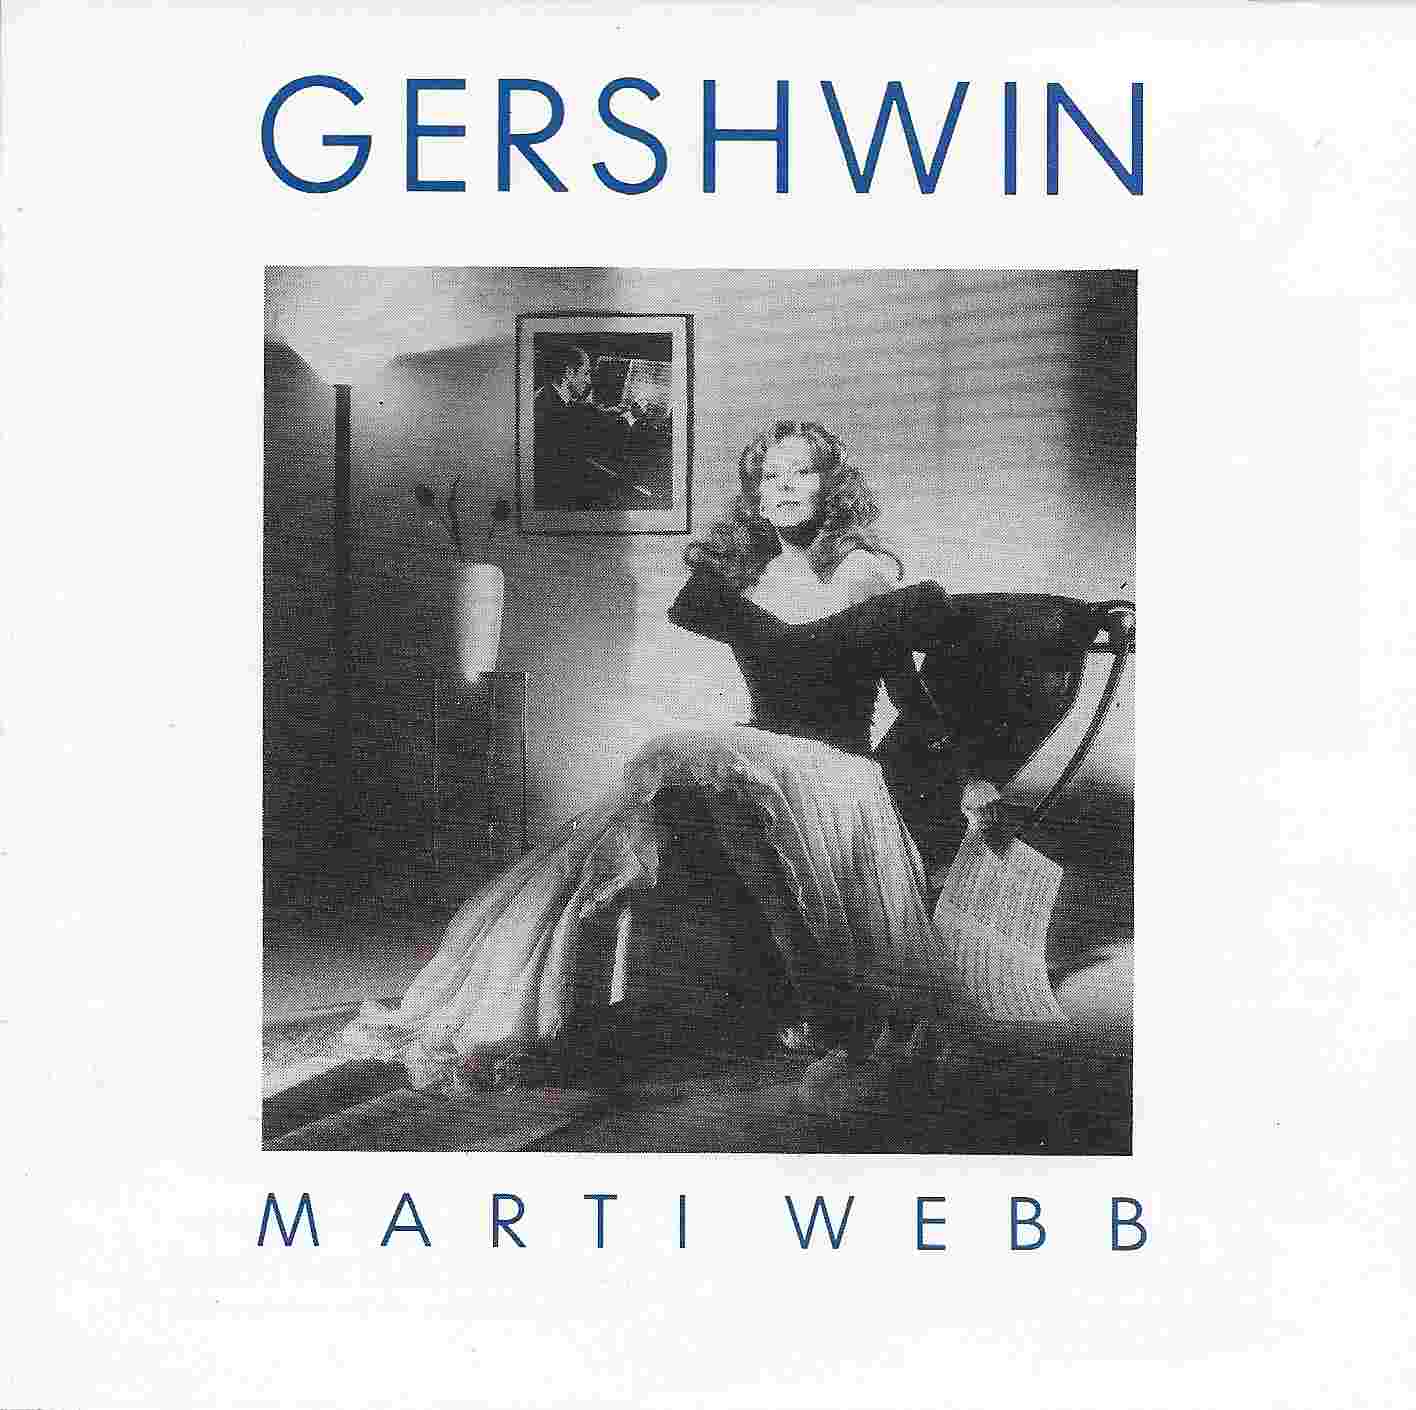 Picture of PWKS 657 Marti Webb sings Gershwin by artist Gershwin / Marti Webb  from the BBC cds - Records and Tapes library